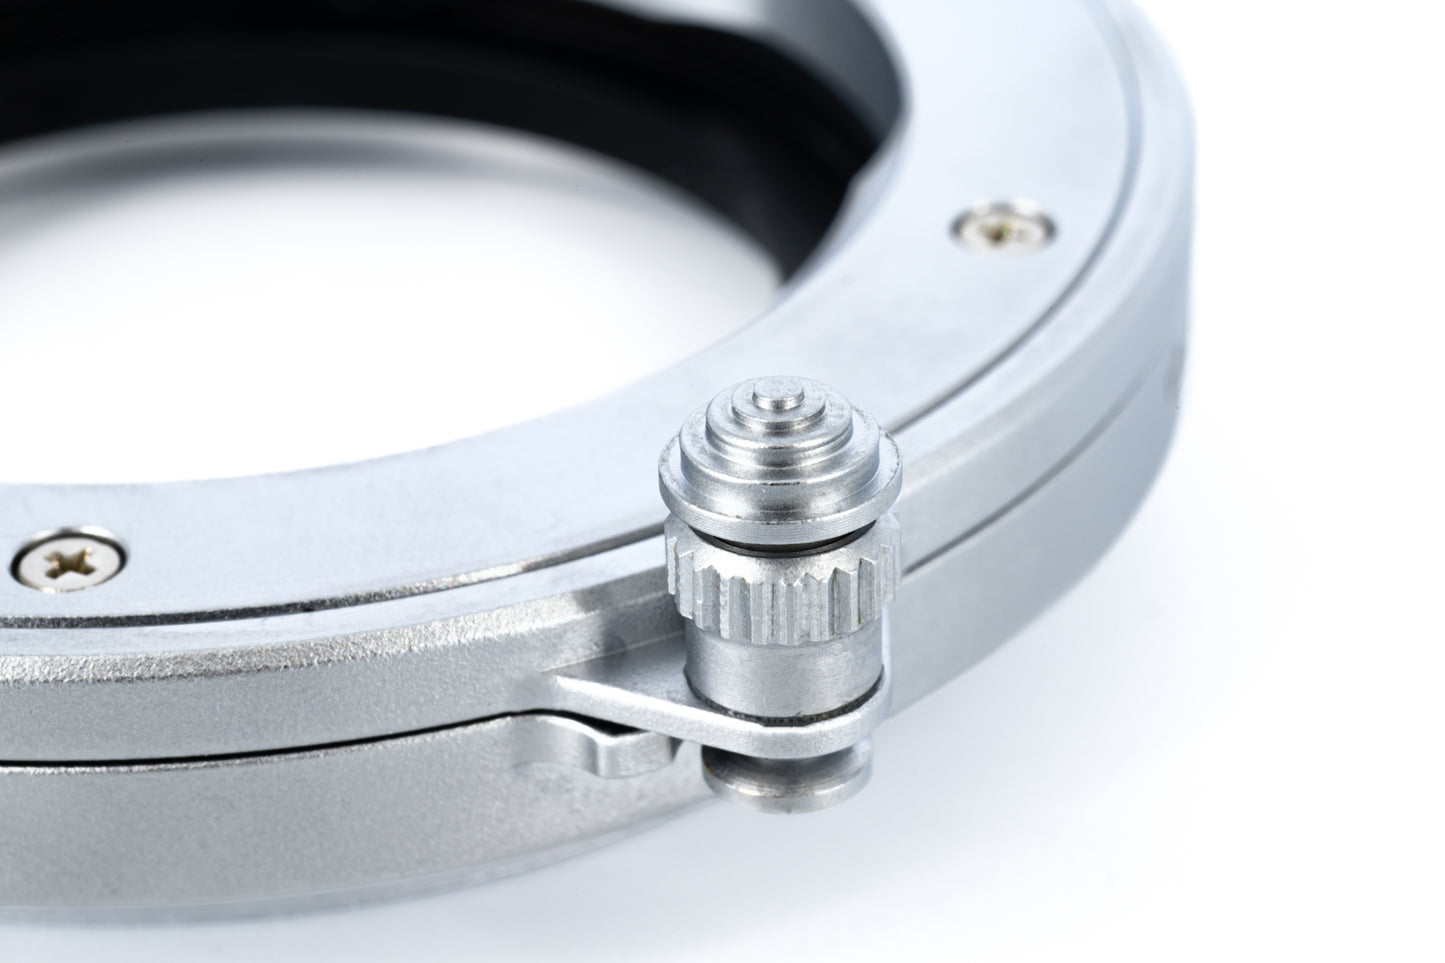 Light Lens Lab M-L Mount Adapter with Close Focus Helicoid